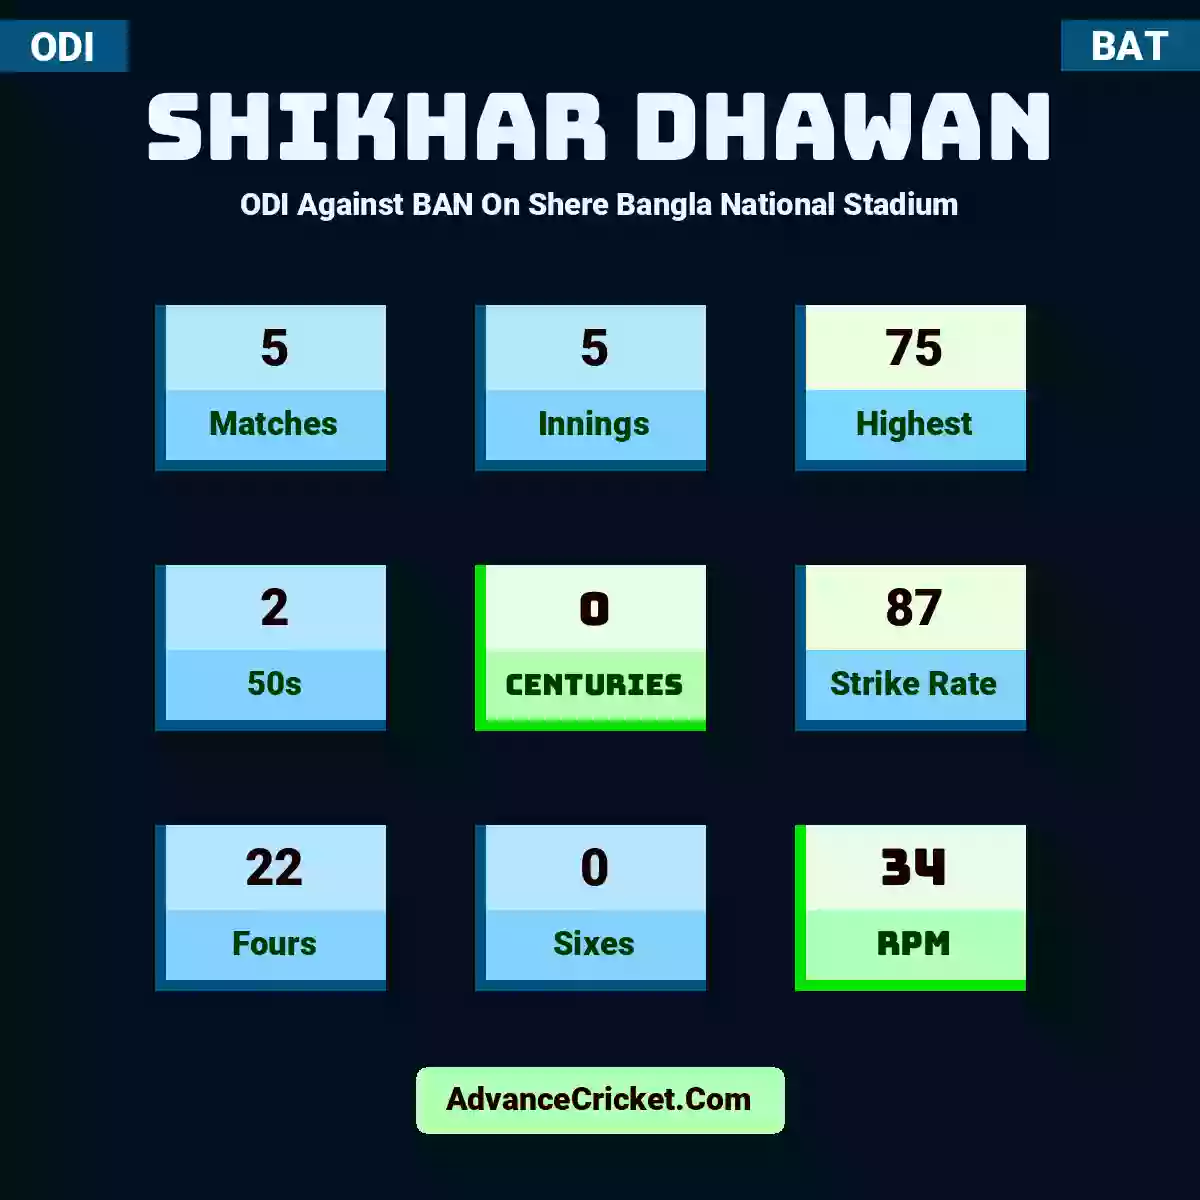 Shikhar Dhawan ODI  Against BAN On Shere Bangla National Stadium, Shikhar Dhawan played 5 matches, scored 75 runs as highest, 2 half-centuries, and 0 centuries, with a strike rate of 87. S.Dhawan hit 22 fours and 0 sixes, with an RPM of 34.